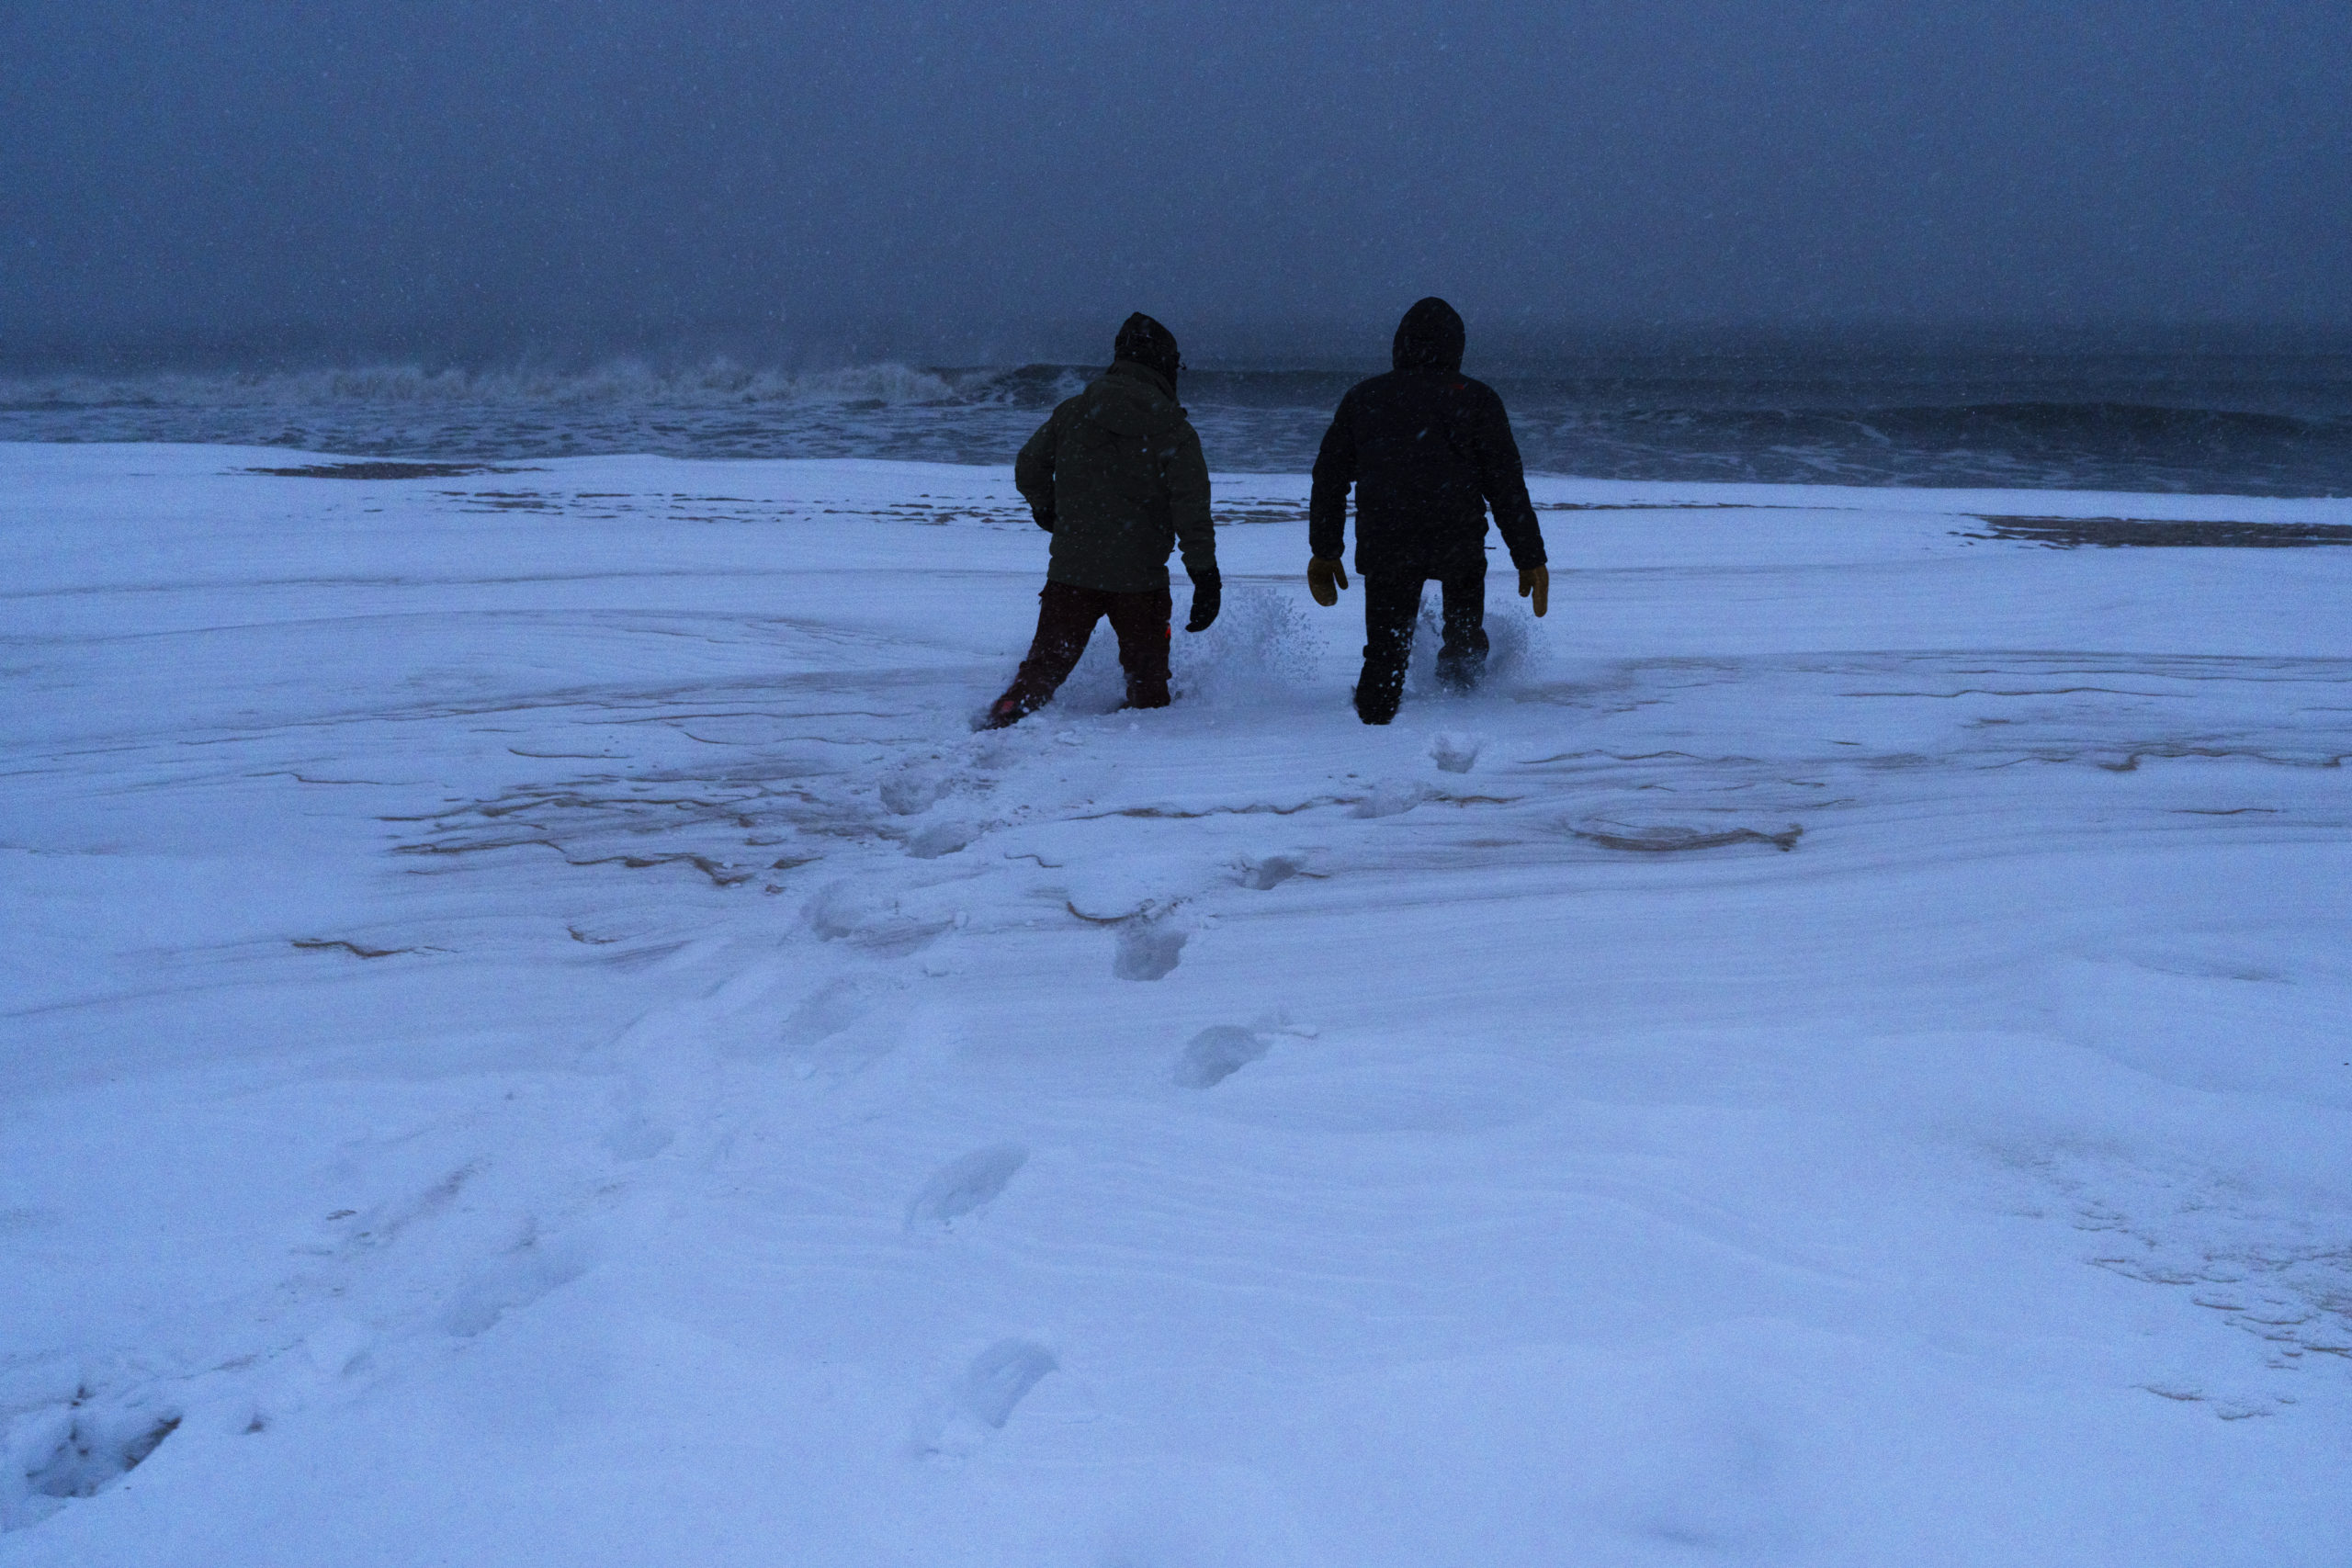 Surfers Nico and Brian Pollak check out the waves during the Blizzard of '22 on Saturday in Bridgehampton.  LORI HAWKINS